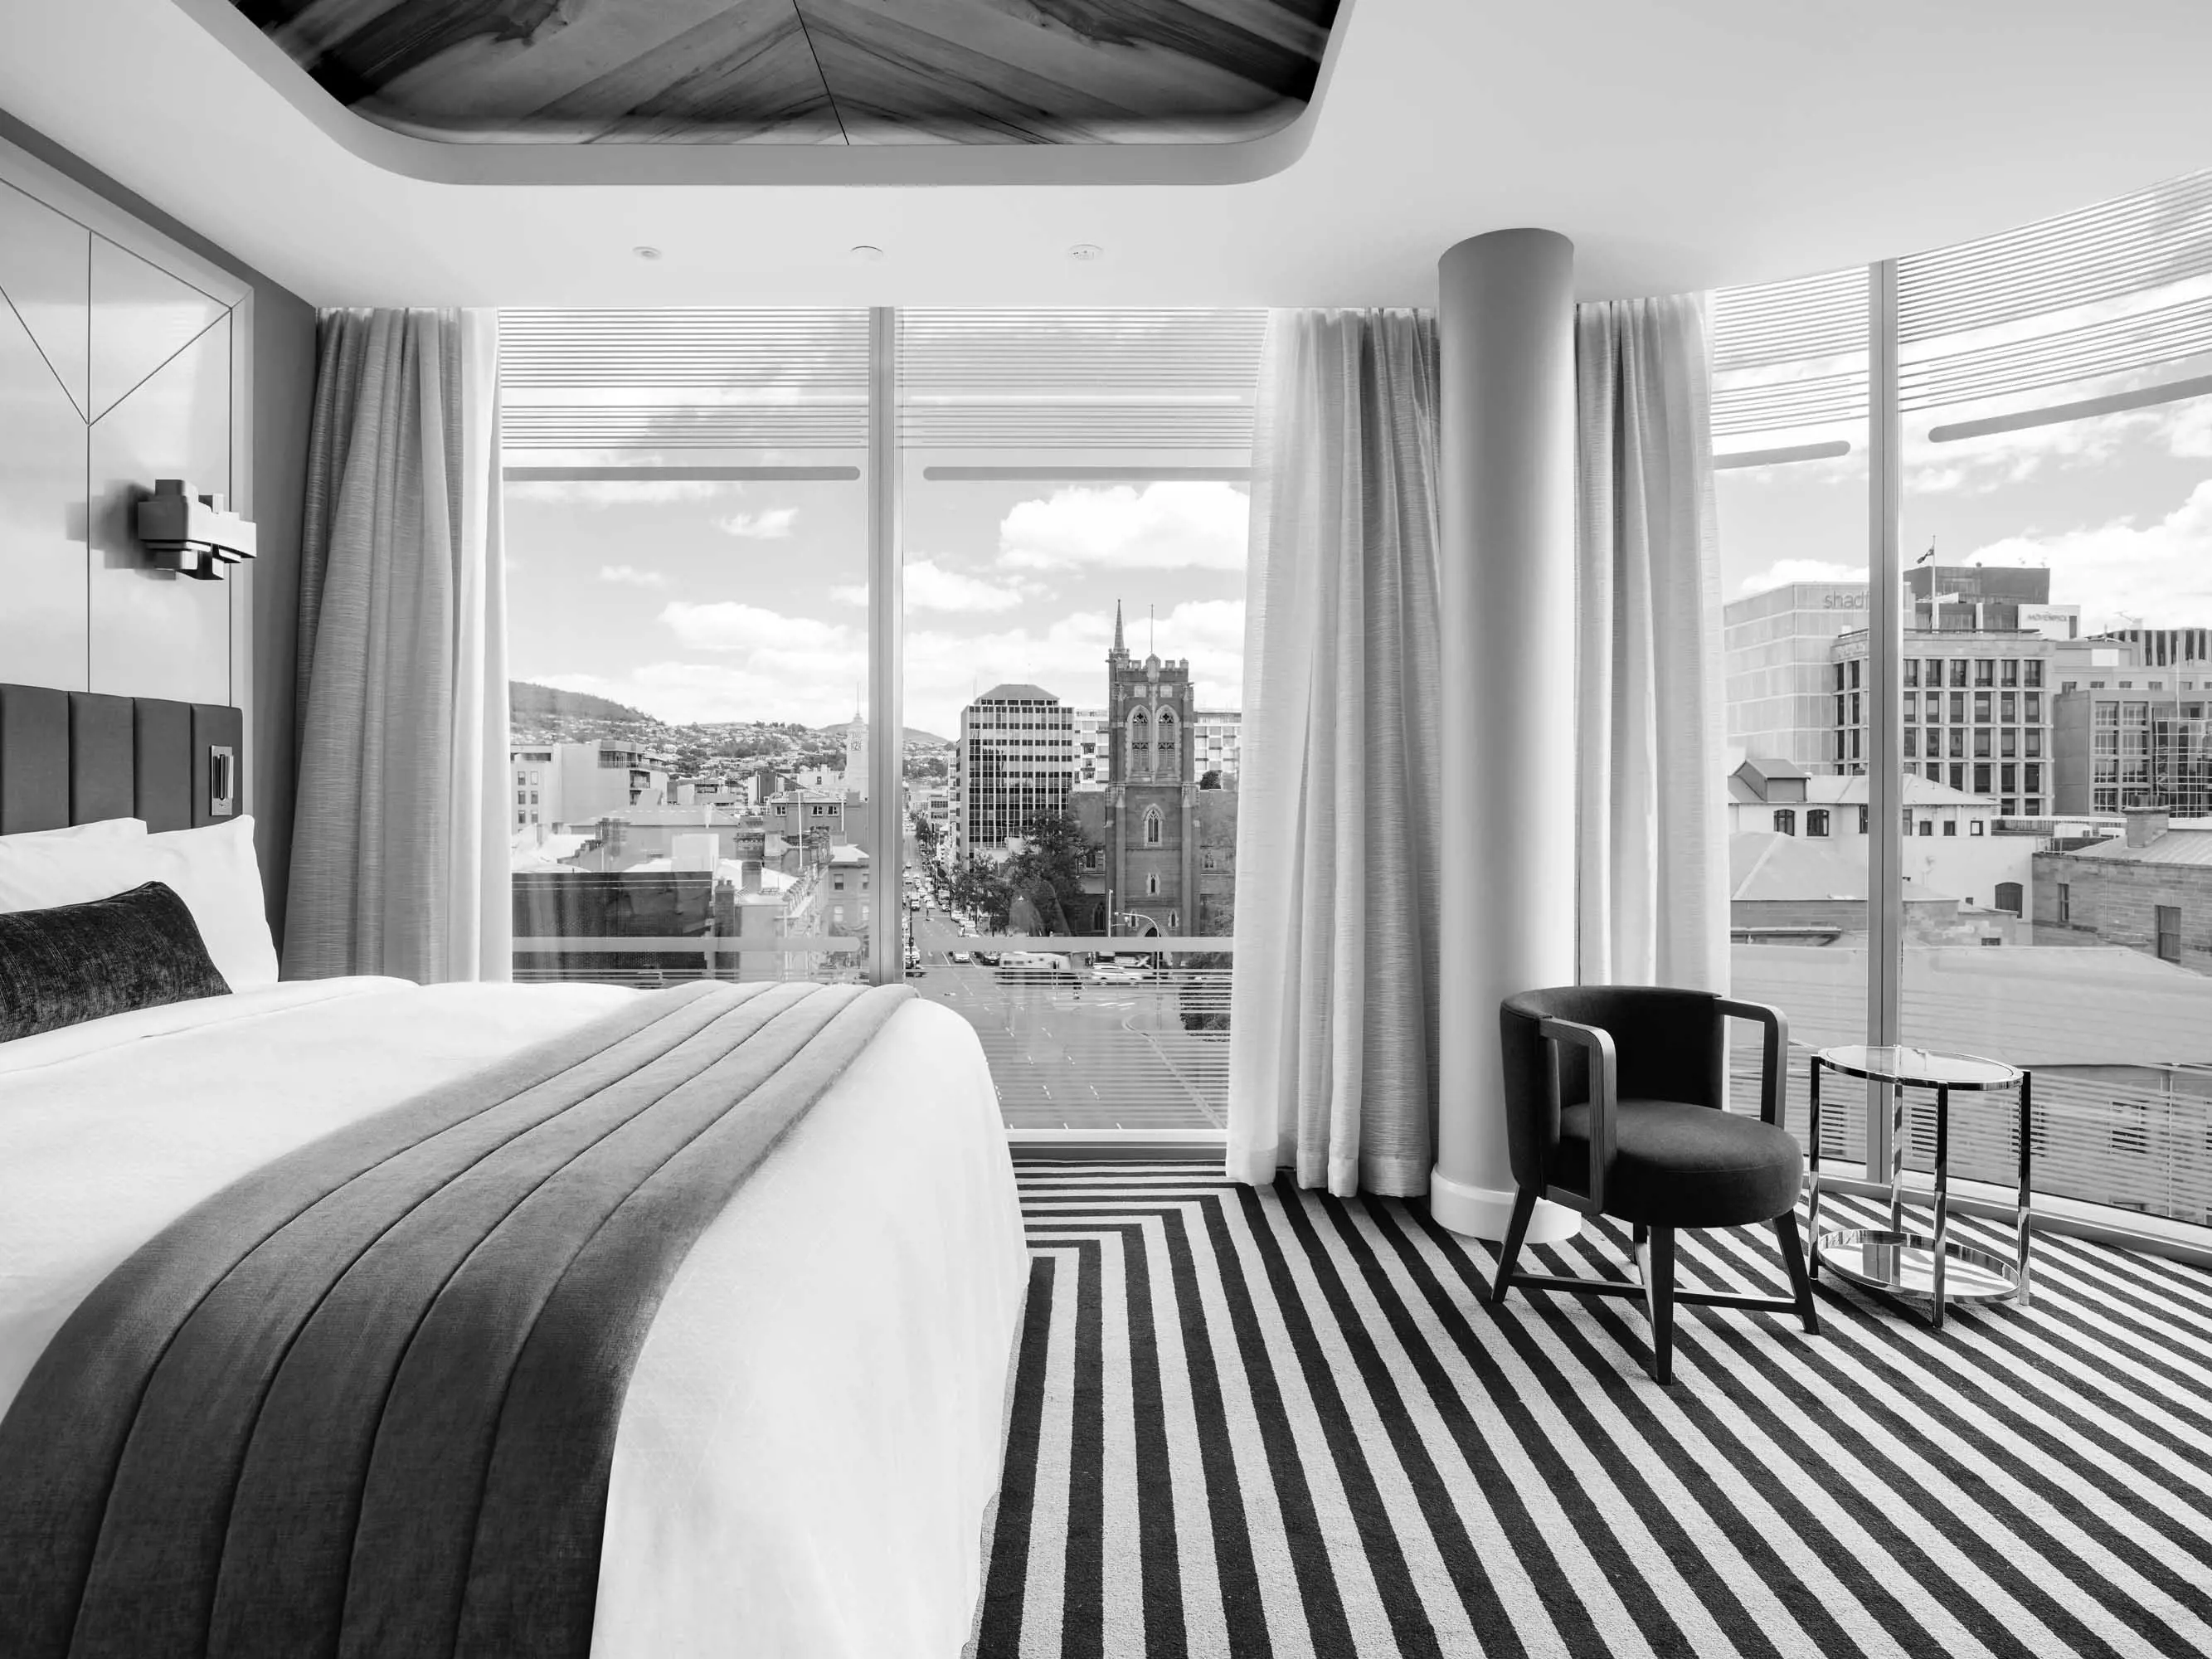 A contemporary hotel room with large windows and elevated views of the Hobart city skyline.